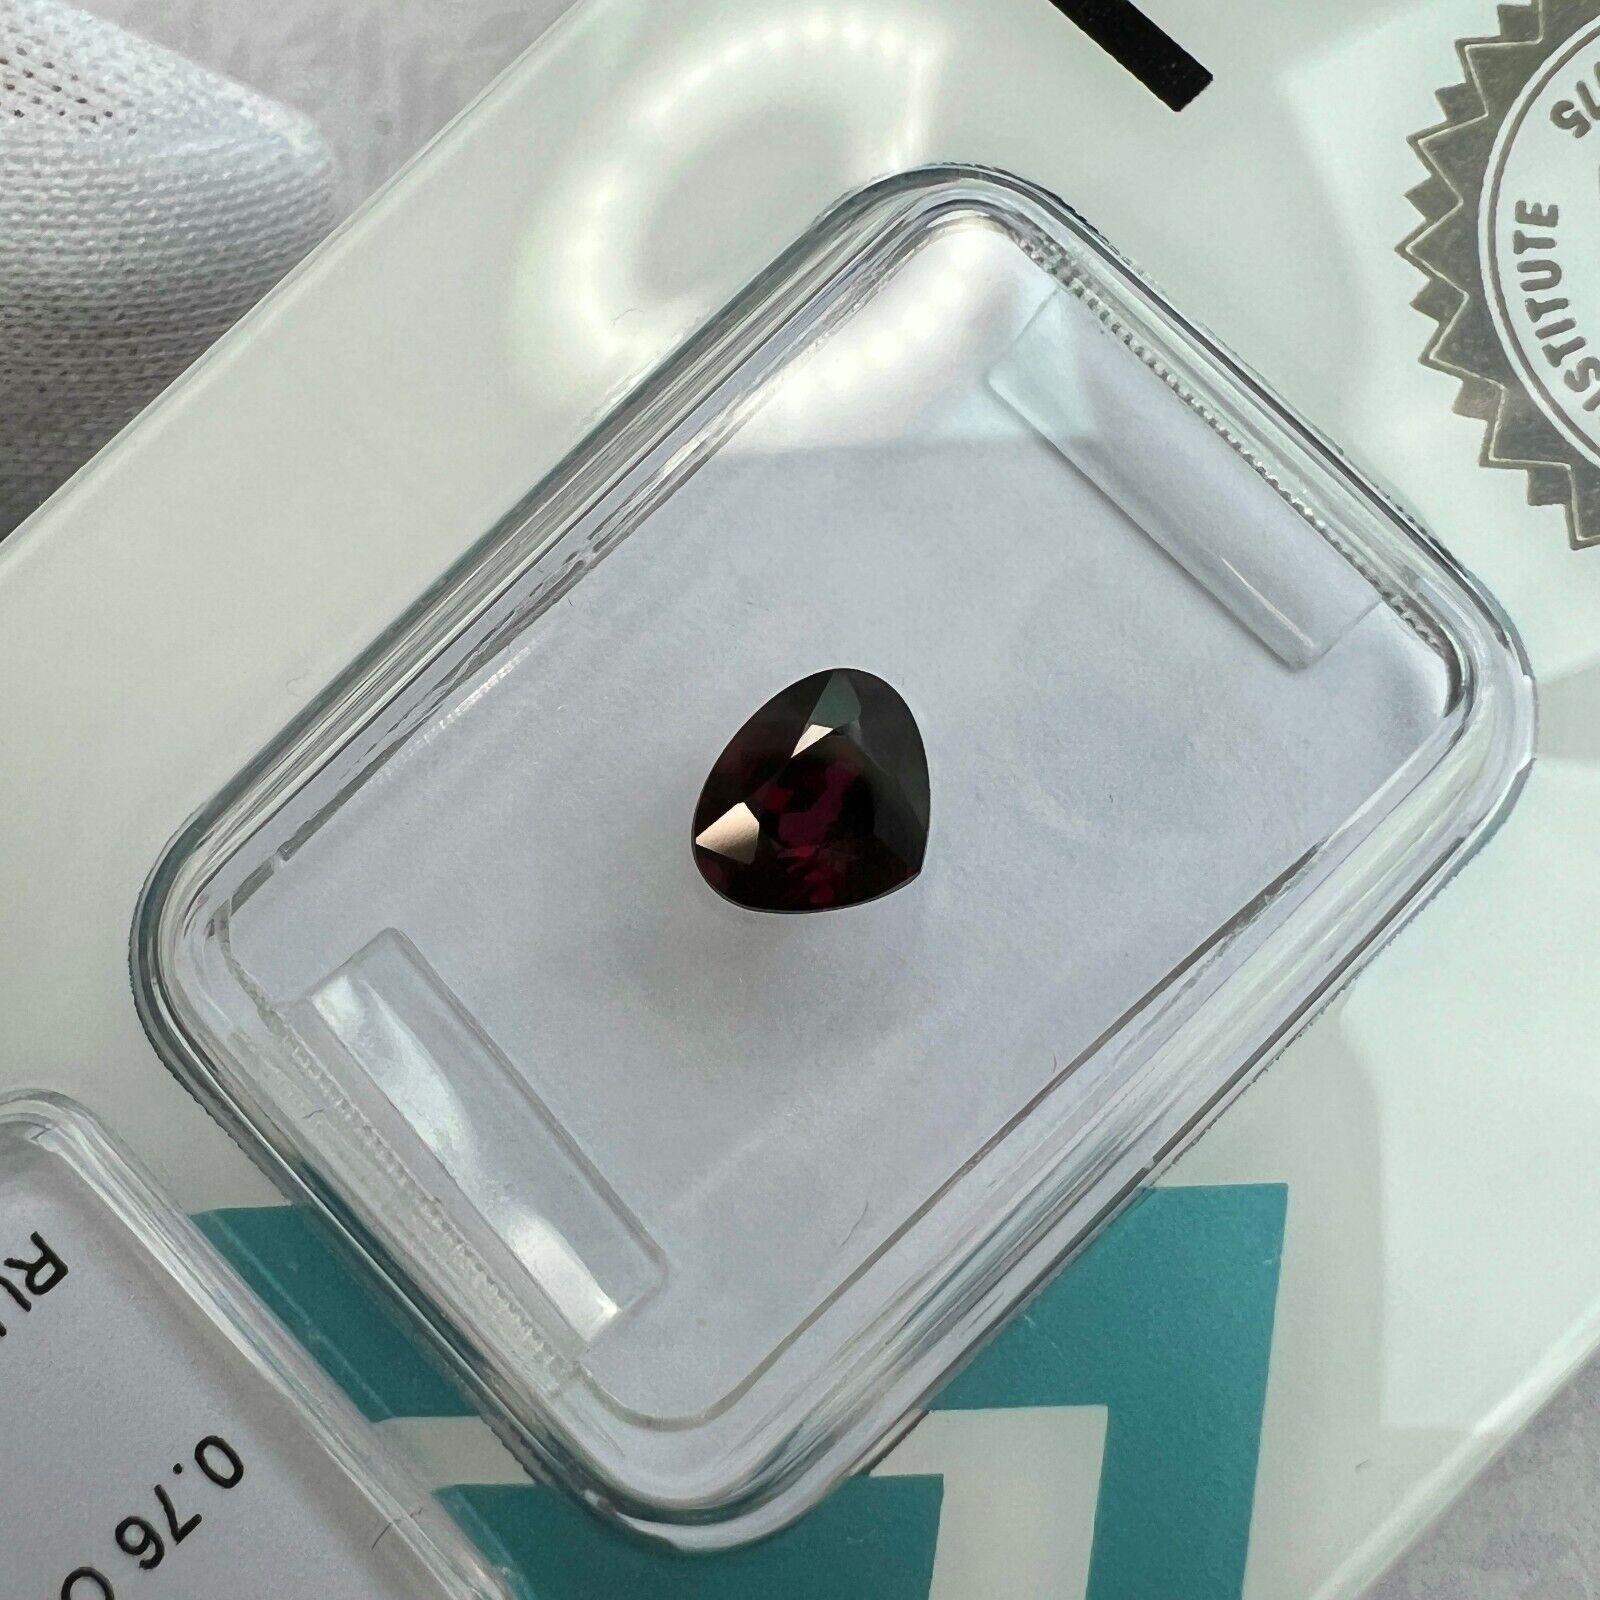 Natural Untreated Deep Red Ruby Pear Cut 0.76Ct IGI Certified Rare Gem

Natural Deep Red Untreated Pear Cut Ruby In IGI Blister.
0.76 Carat with an excellent pear cut and very good clarity, a clean stone with only some small natural inclusions